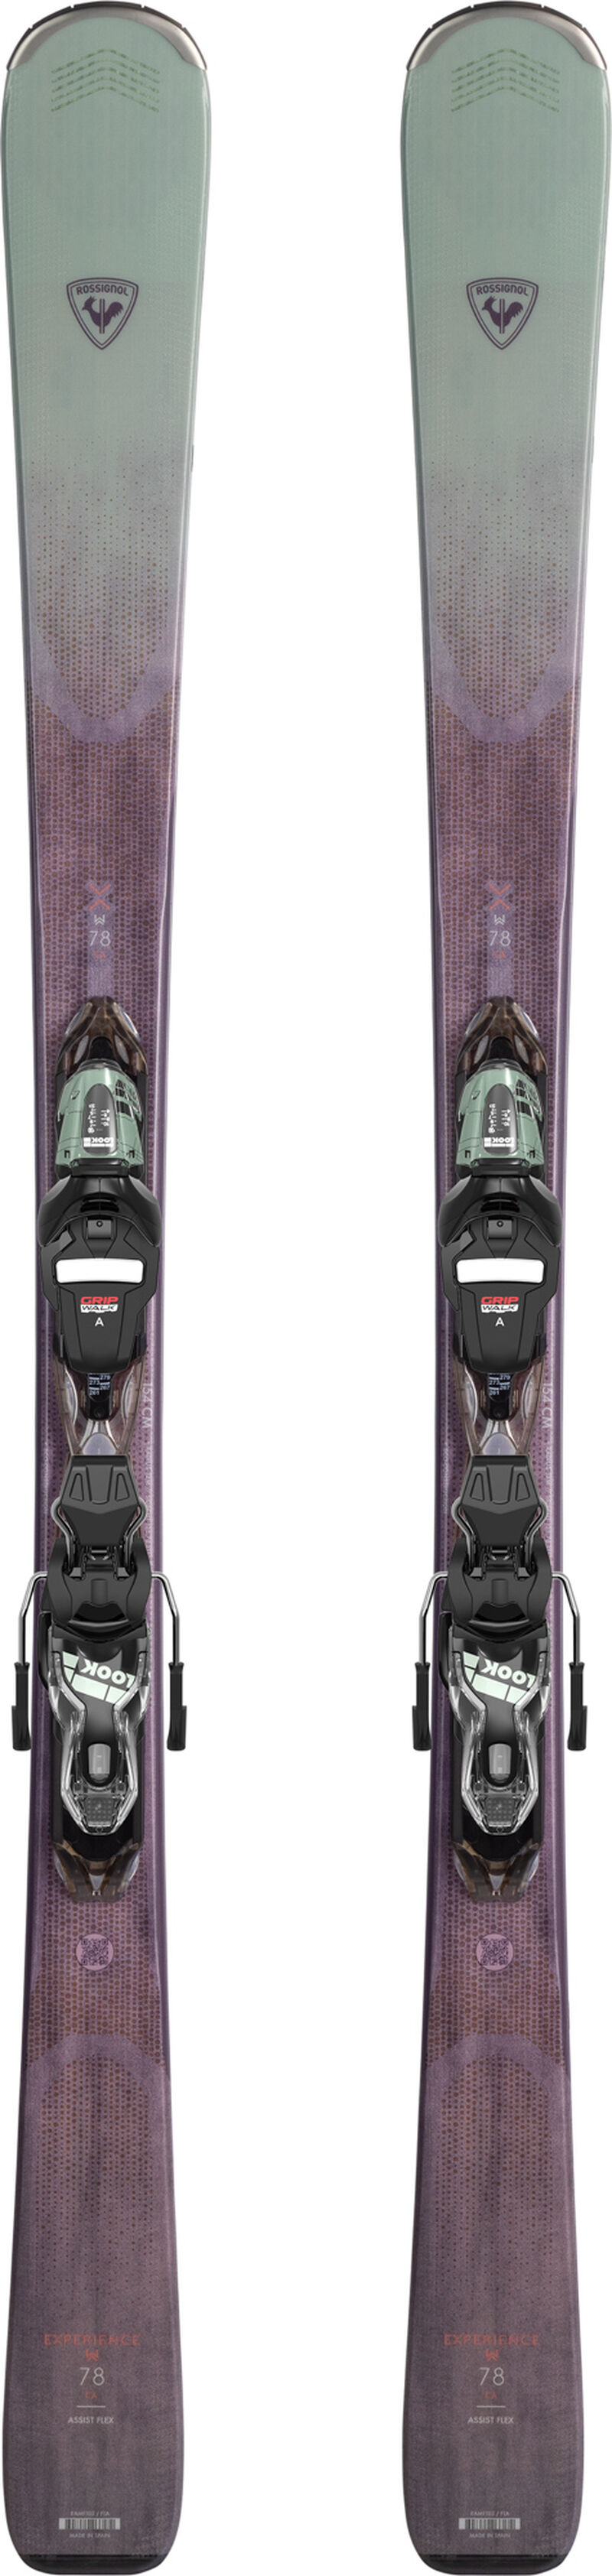 Rossignol DAMEN ALL MOUNTAIN SKIER EXPERIENCE W 78 CARBON (XPRESS) 